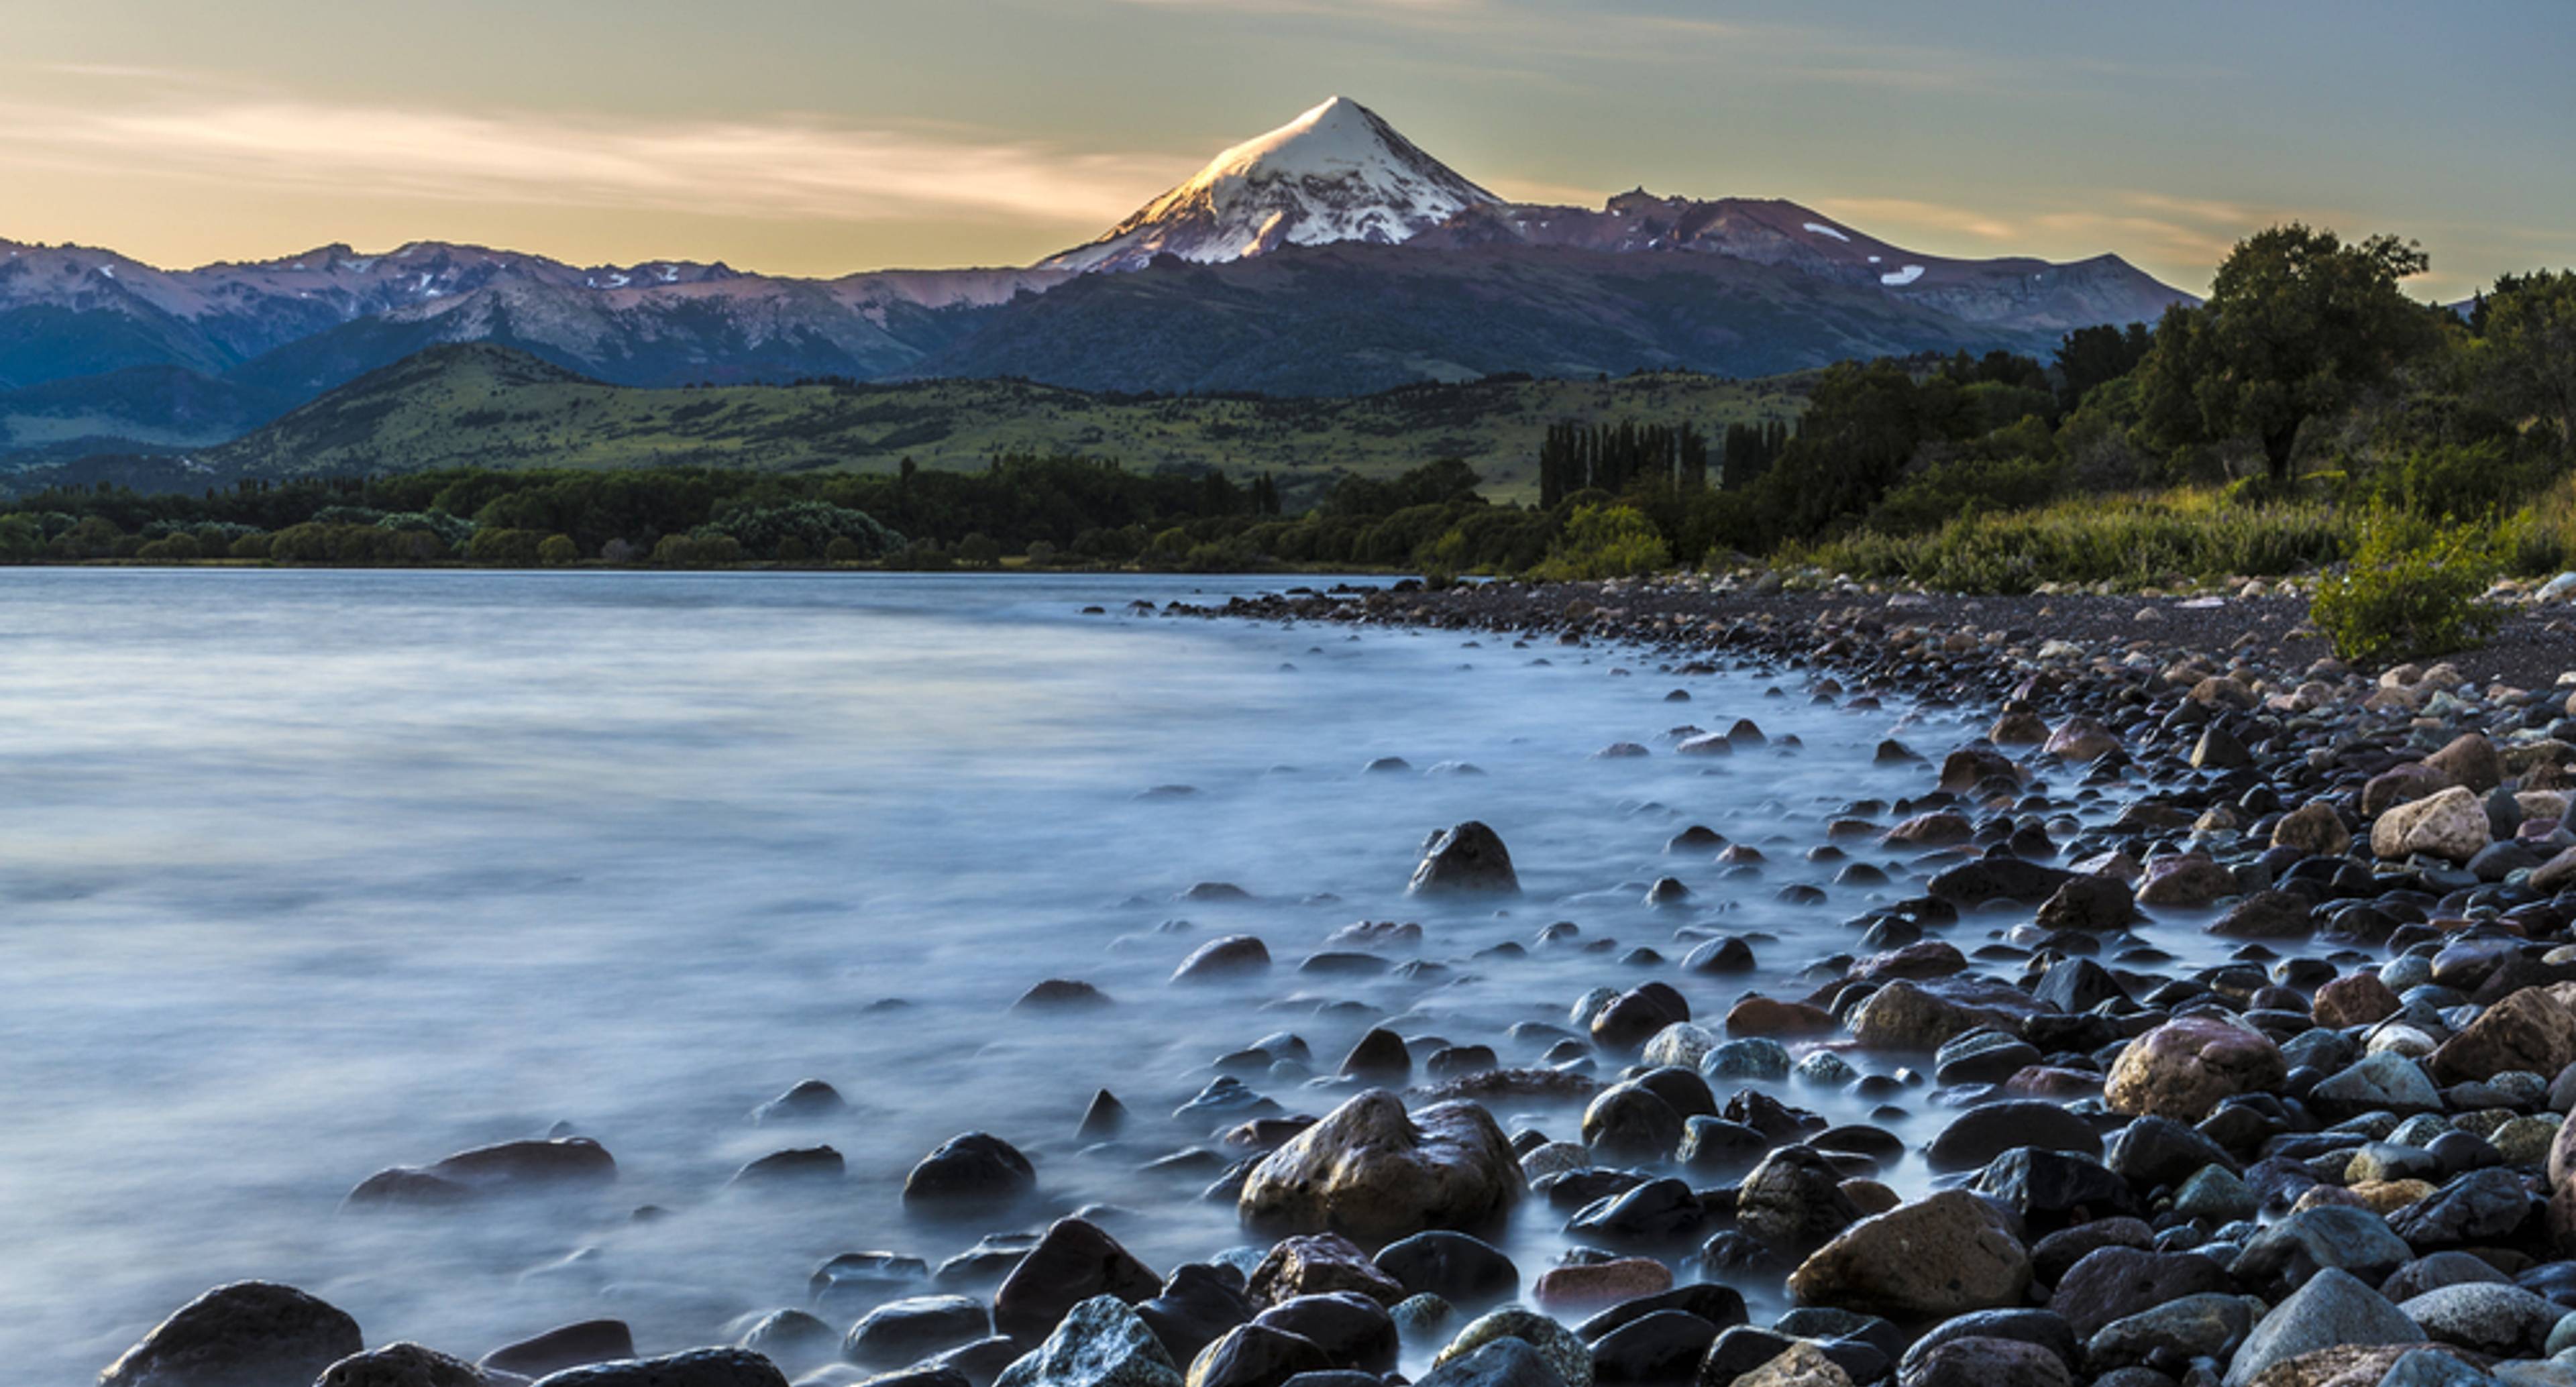 The Imposing Lanin Volcano and the Huechulafquen Lake